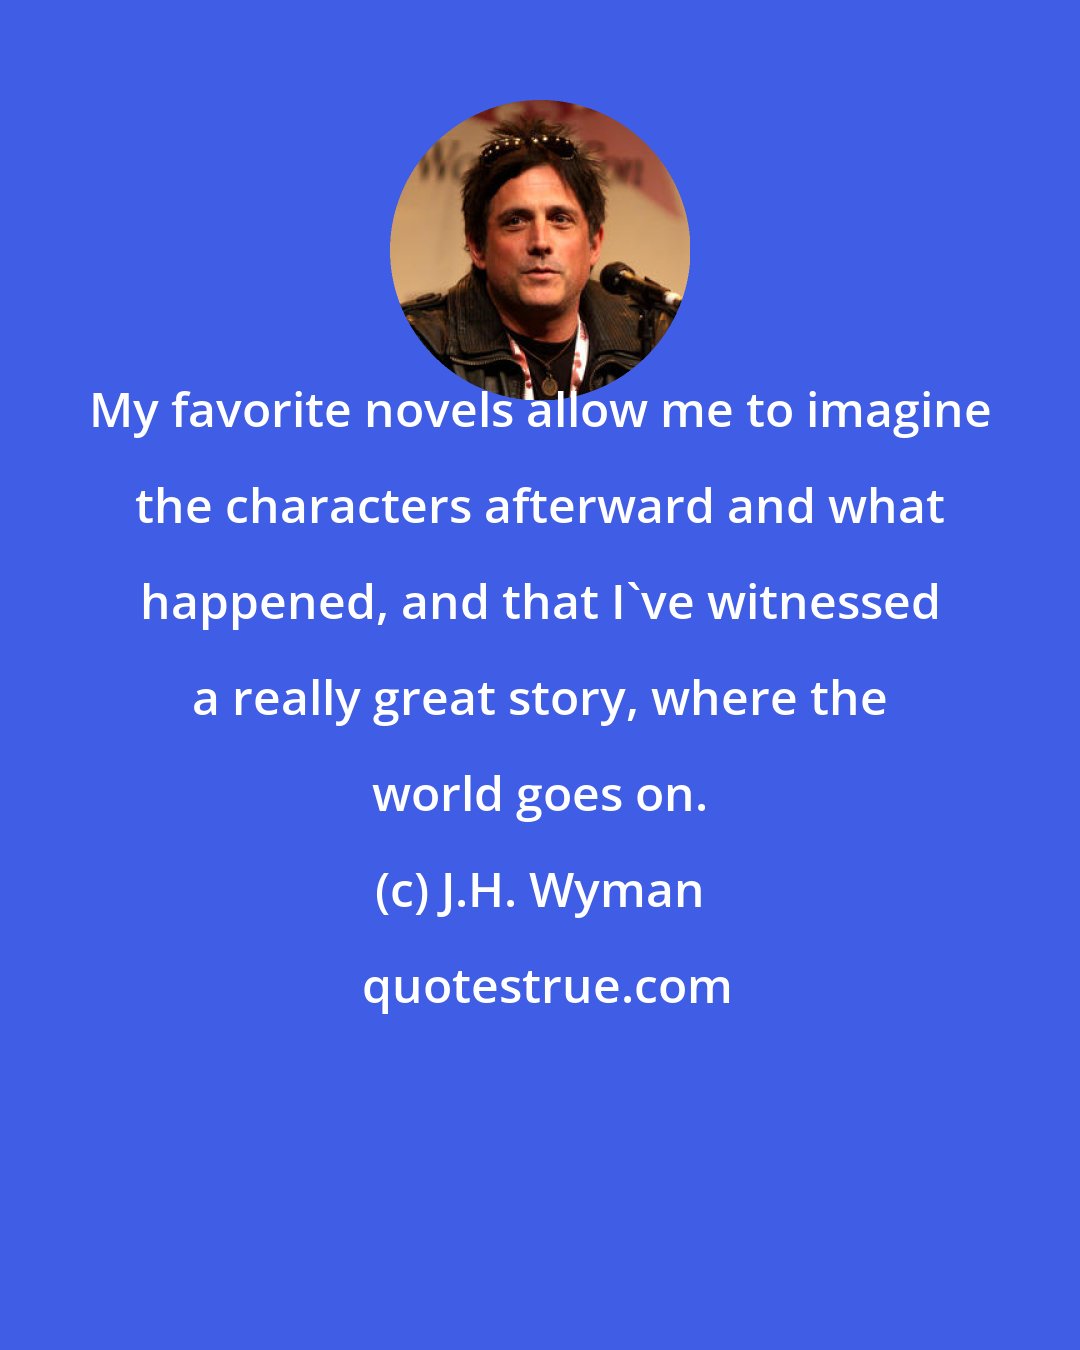 J.H. Wyman: My favorite novels allow me to imagine the characters afterward and what happened, and that I've witnessed a really great story, where the world goes on.